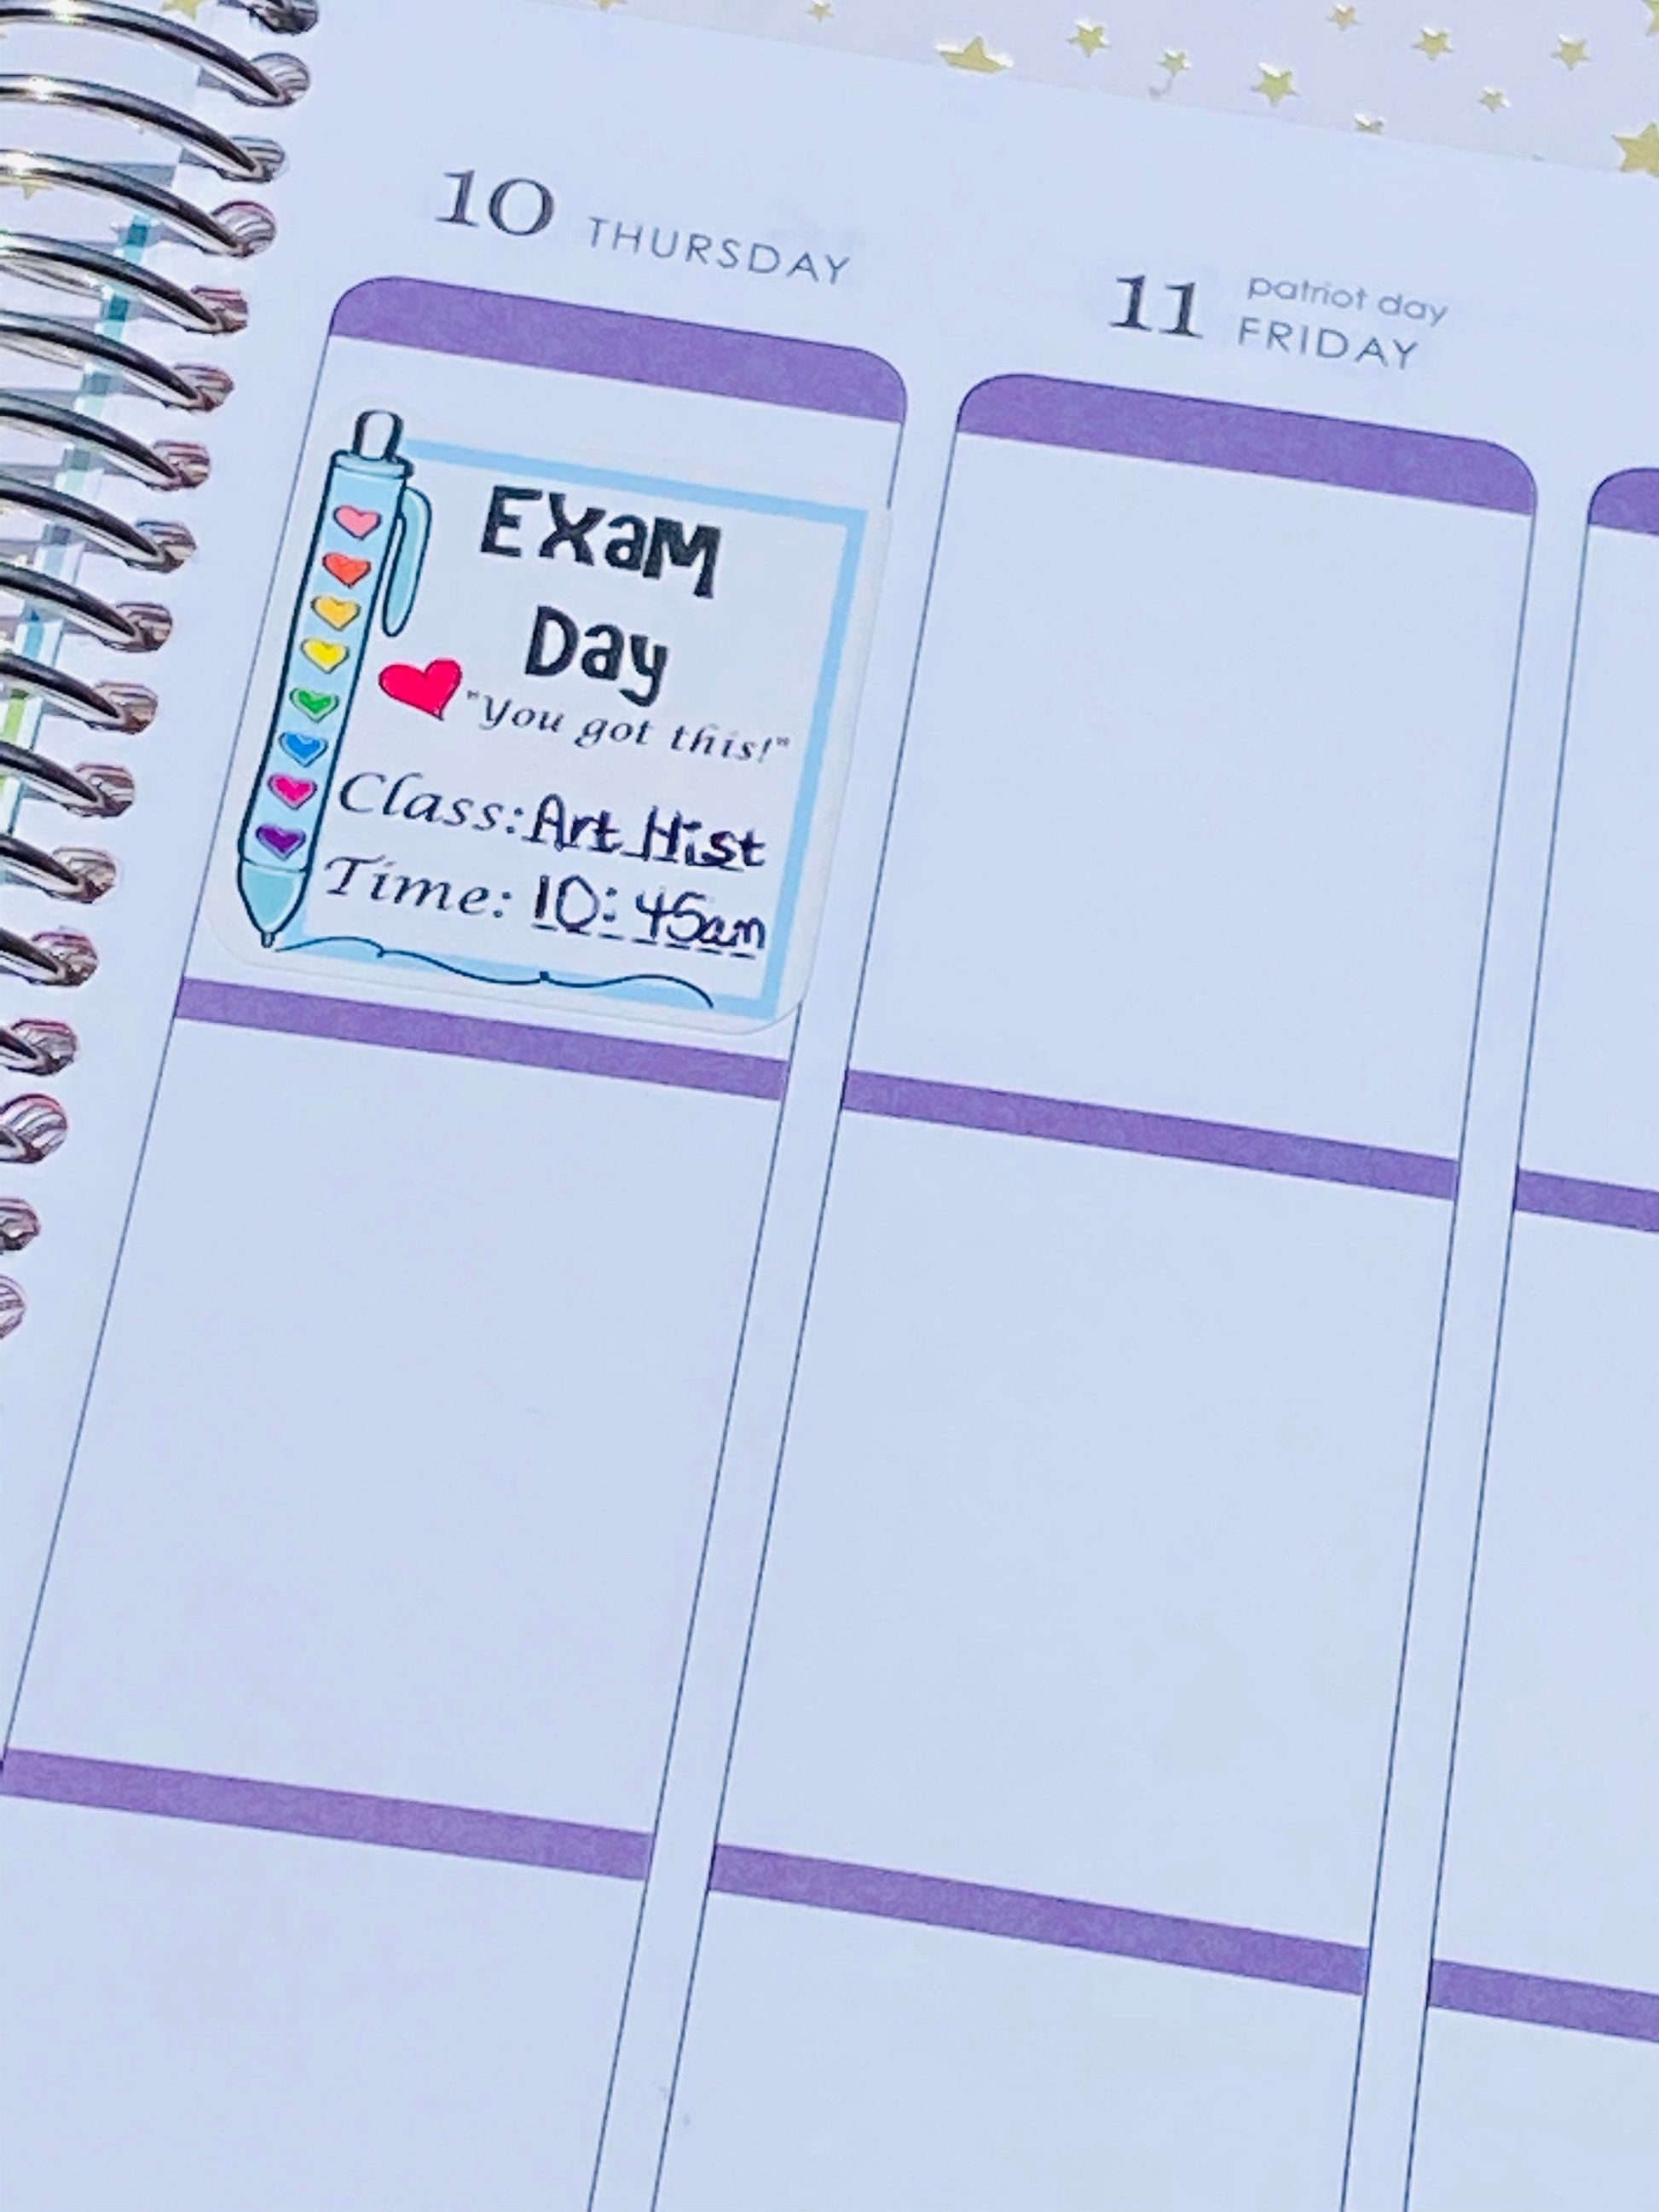 Each Exam Day sticker is 1.5 x 1.75 inches and contains space for you to write the time and subject name of your upcoming exam.